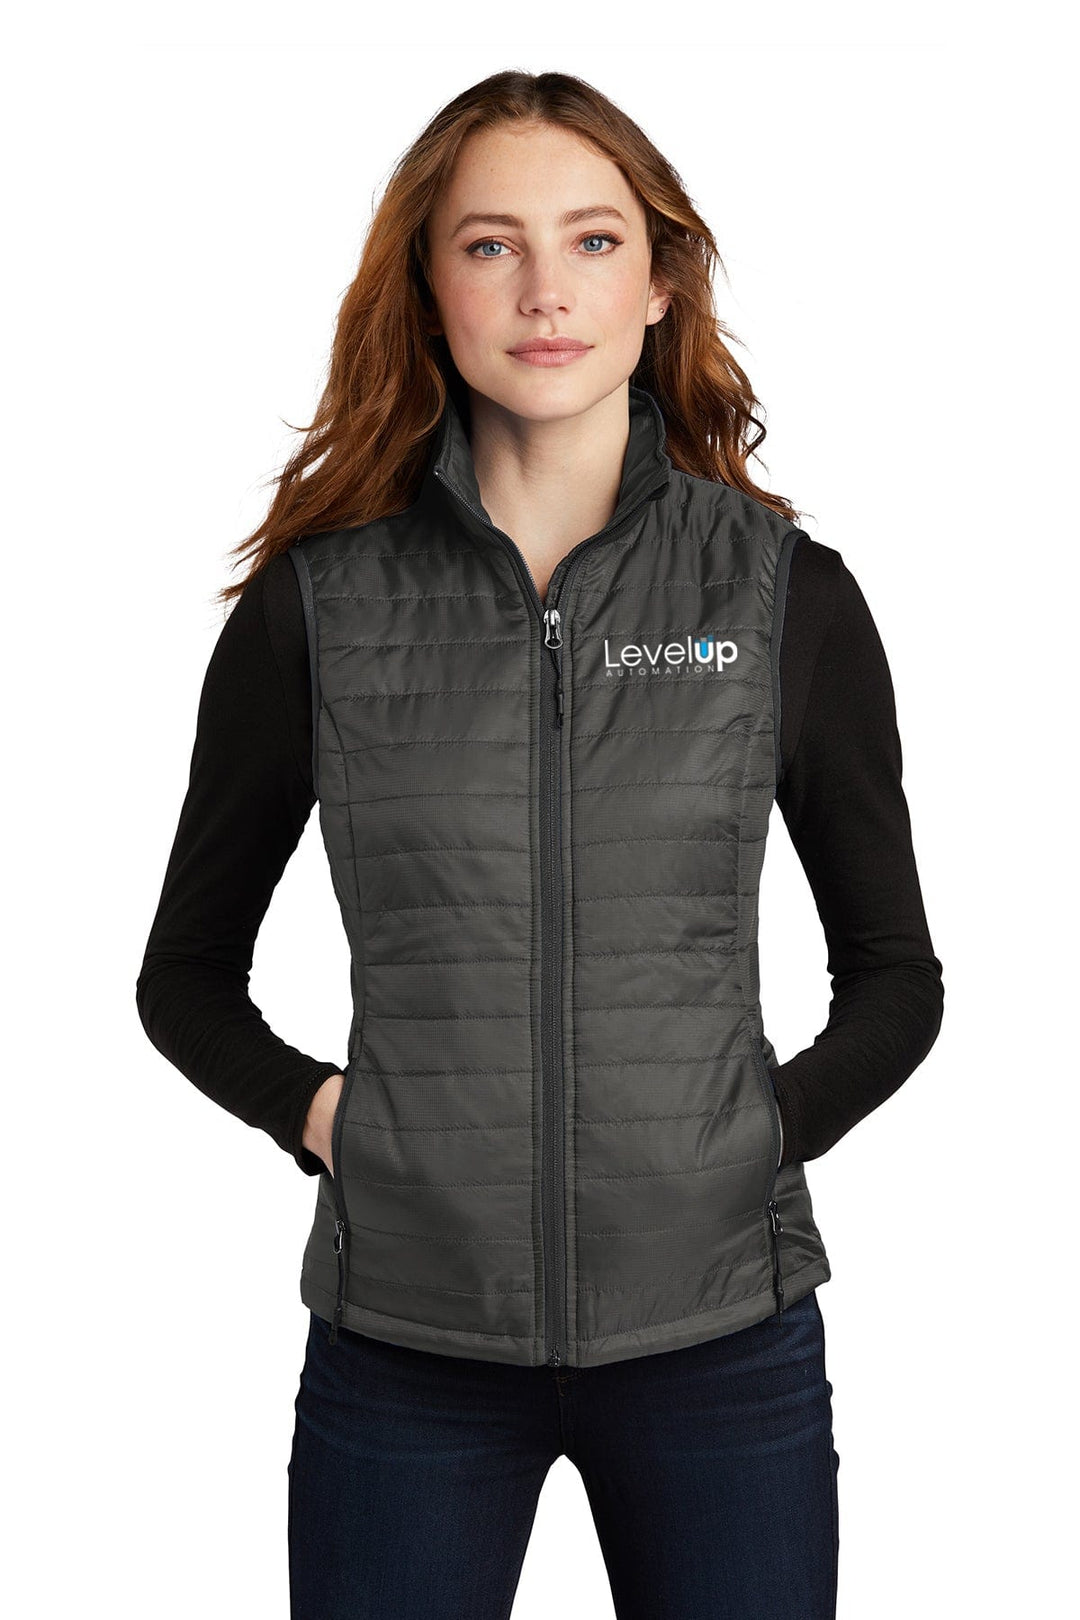 Level Up Automation Apparel & Accessories Women's Puffy Vest - Graphite